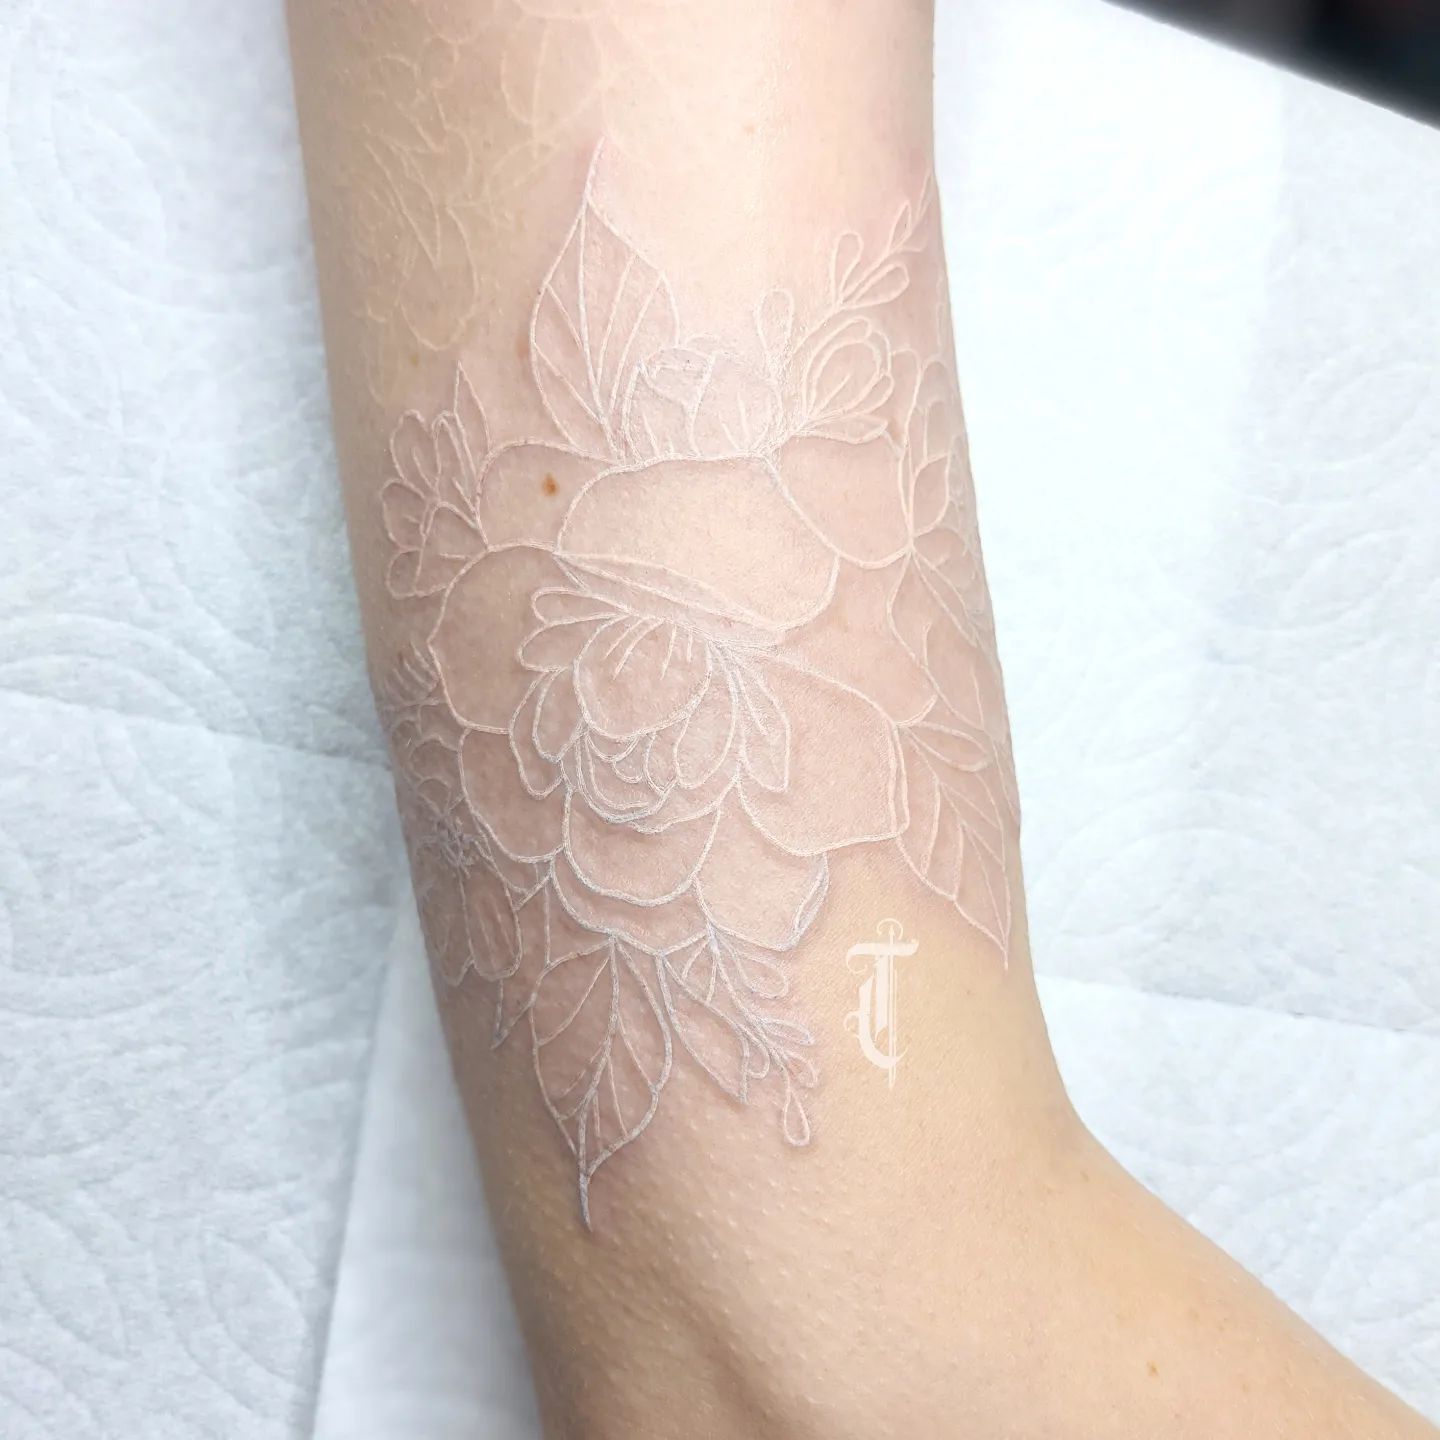 Wanna be different and show contrast between imagination and reality? If your answer is yes, why not getting a white ink rose tattoo? The contrast between the white ink and the red of the rose is great. It works well with your skin tone, too.